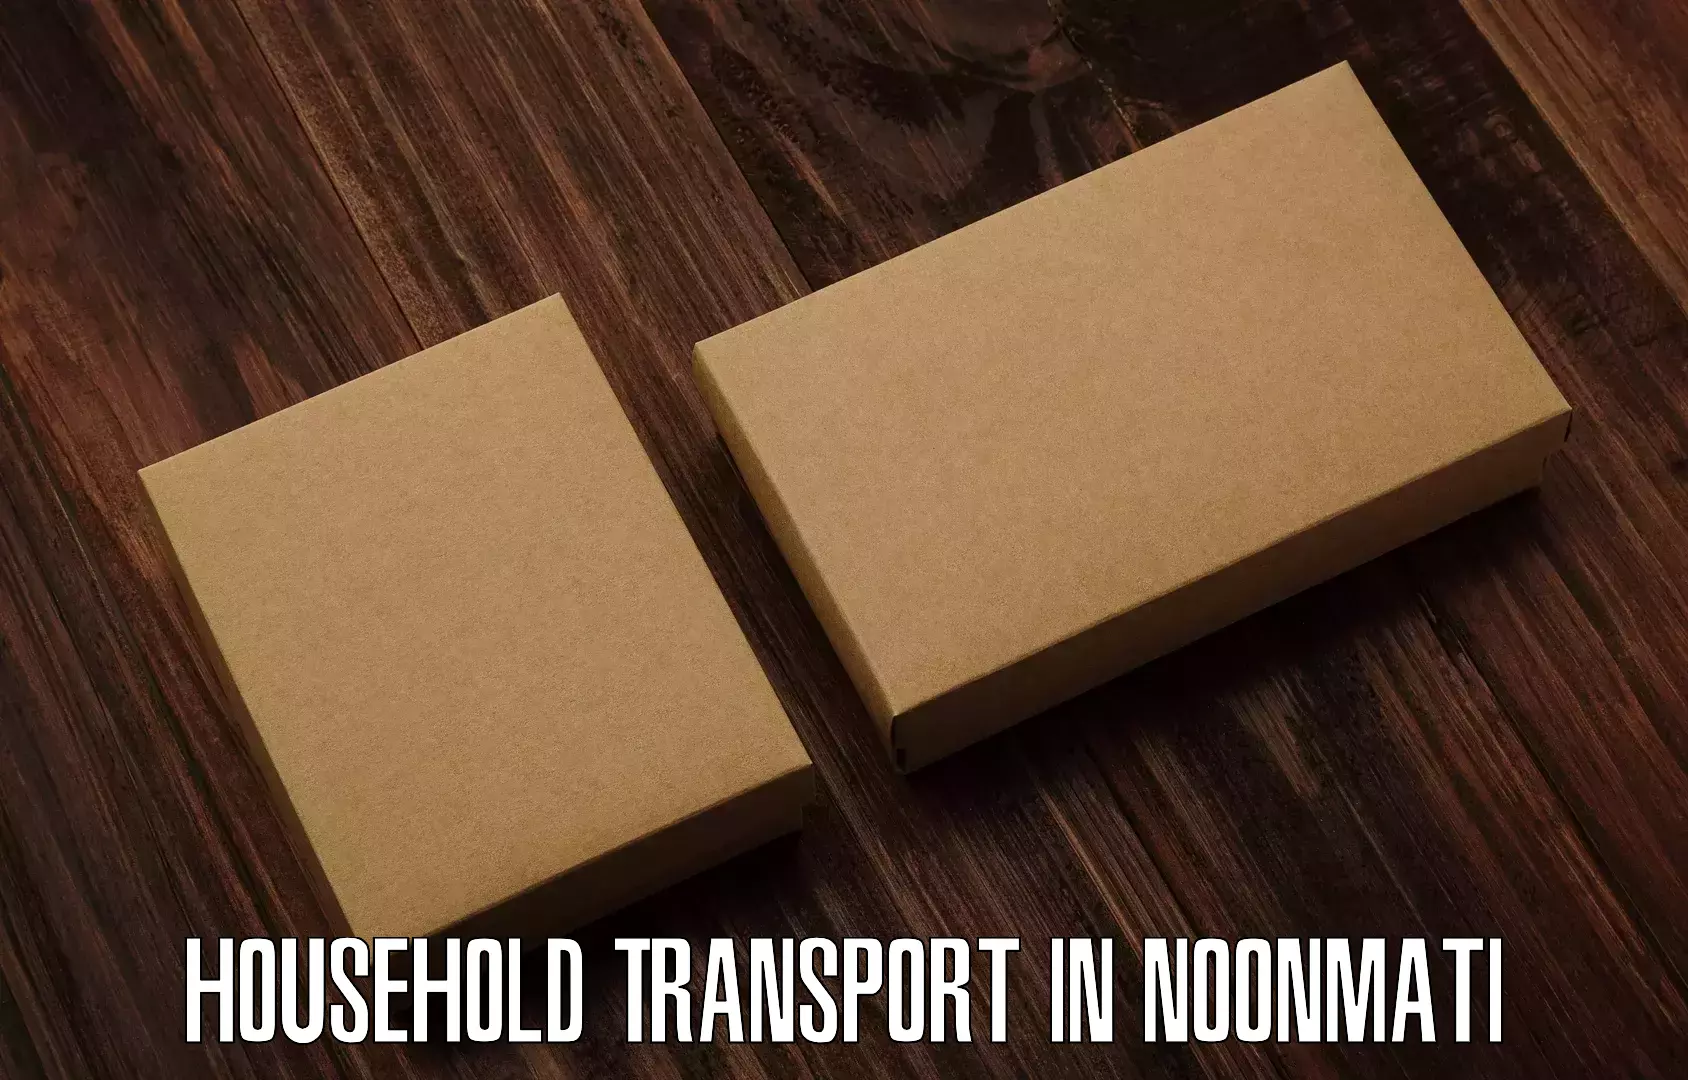 Household goods transport service in Noonmati